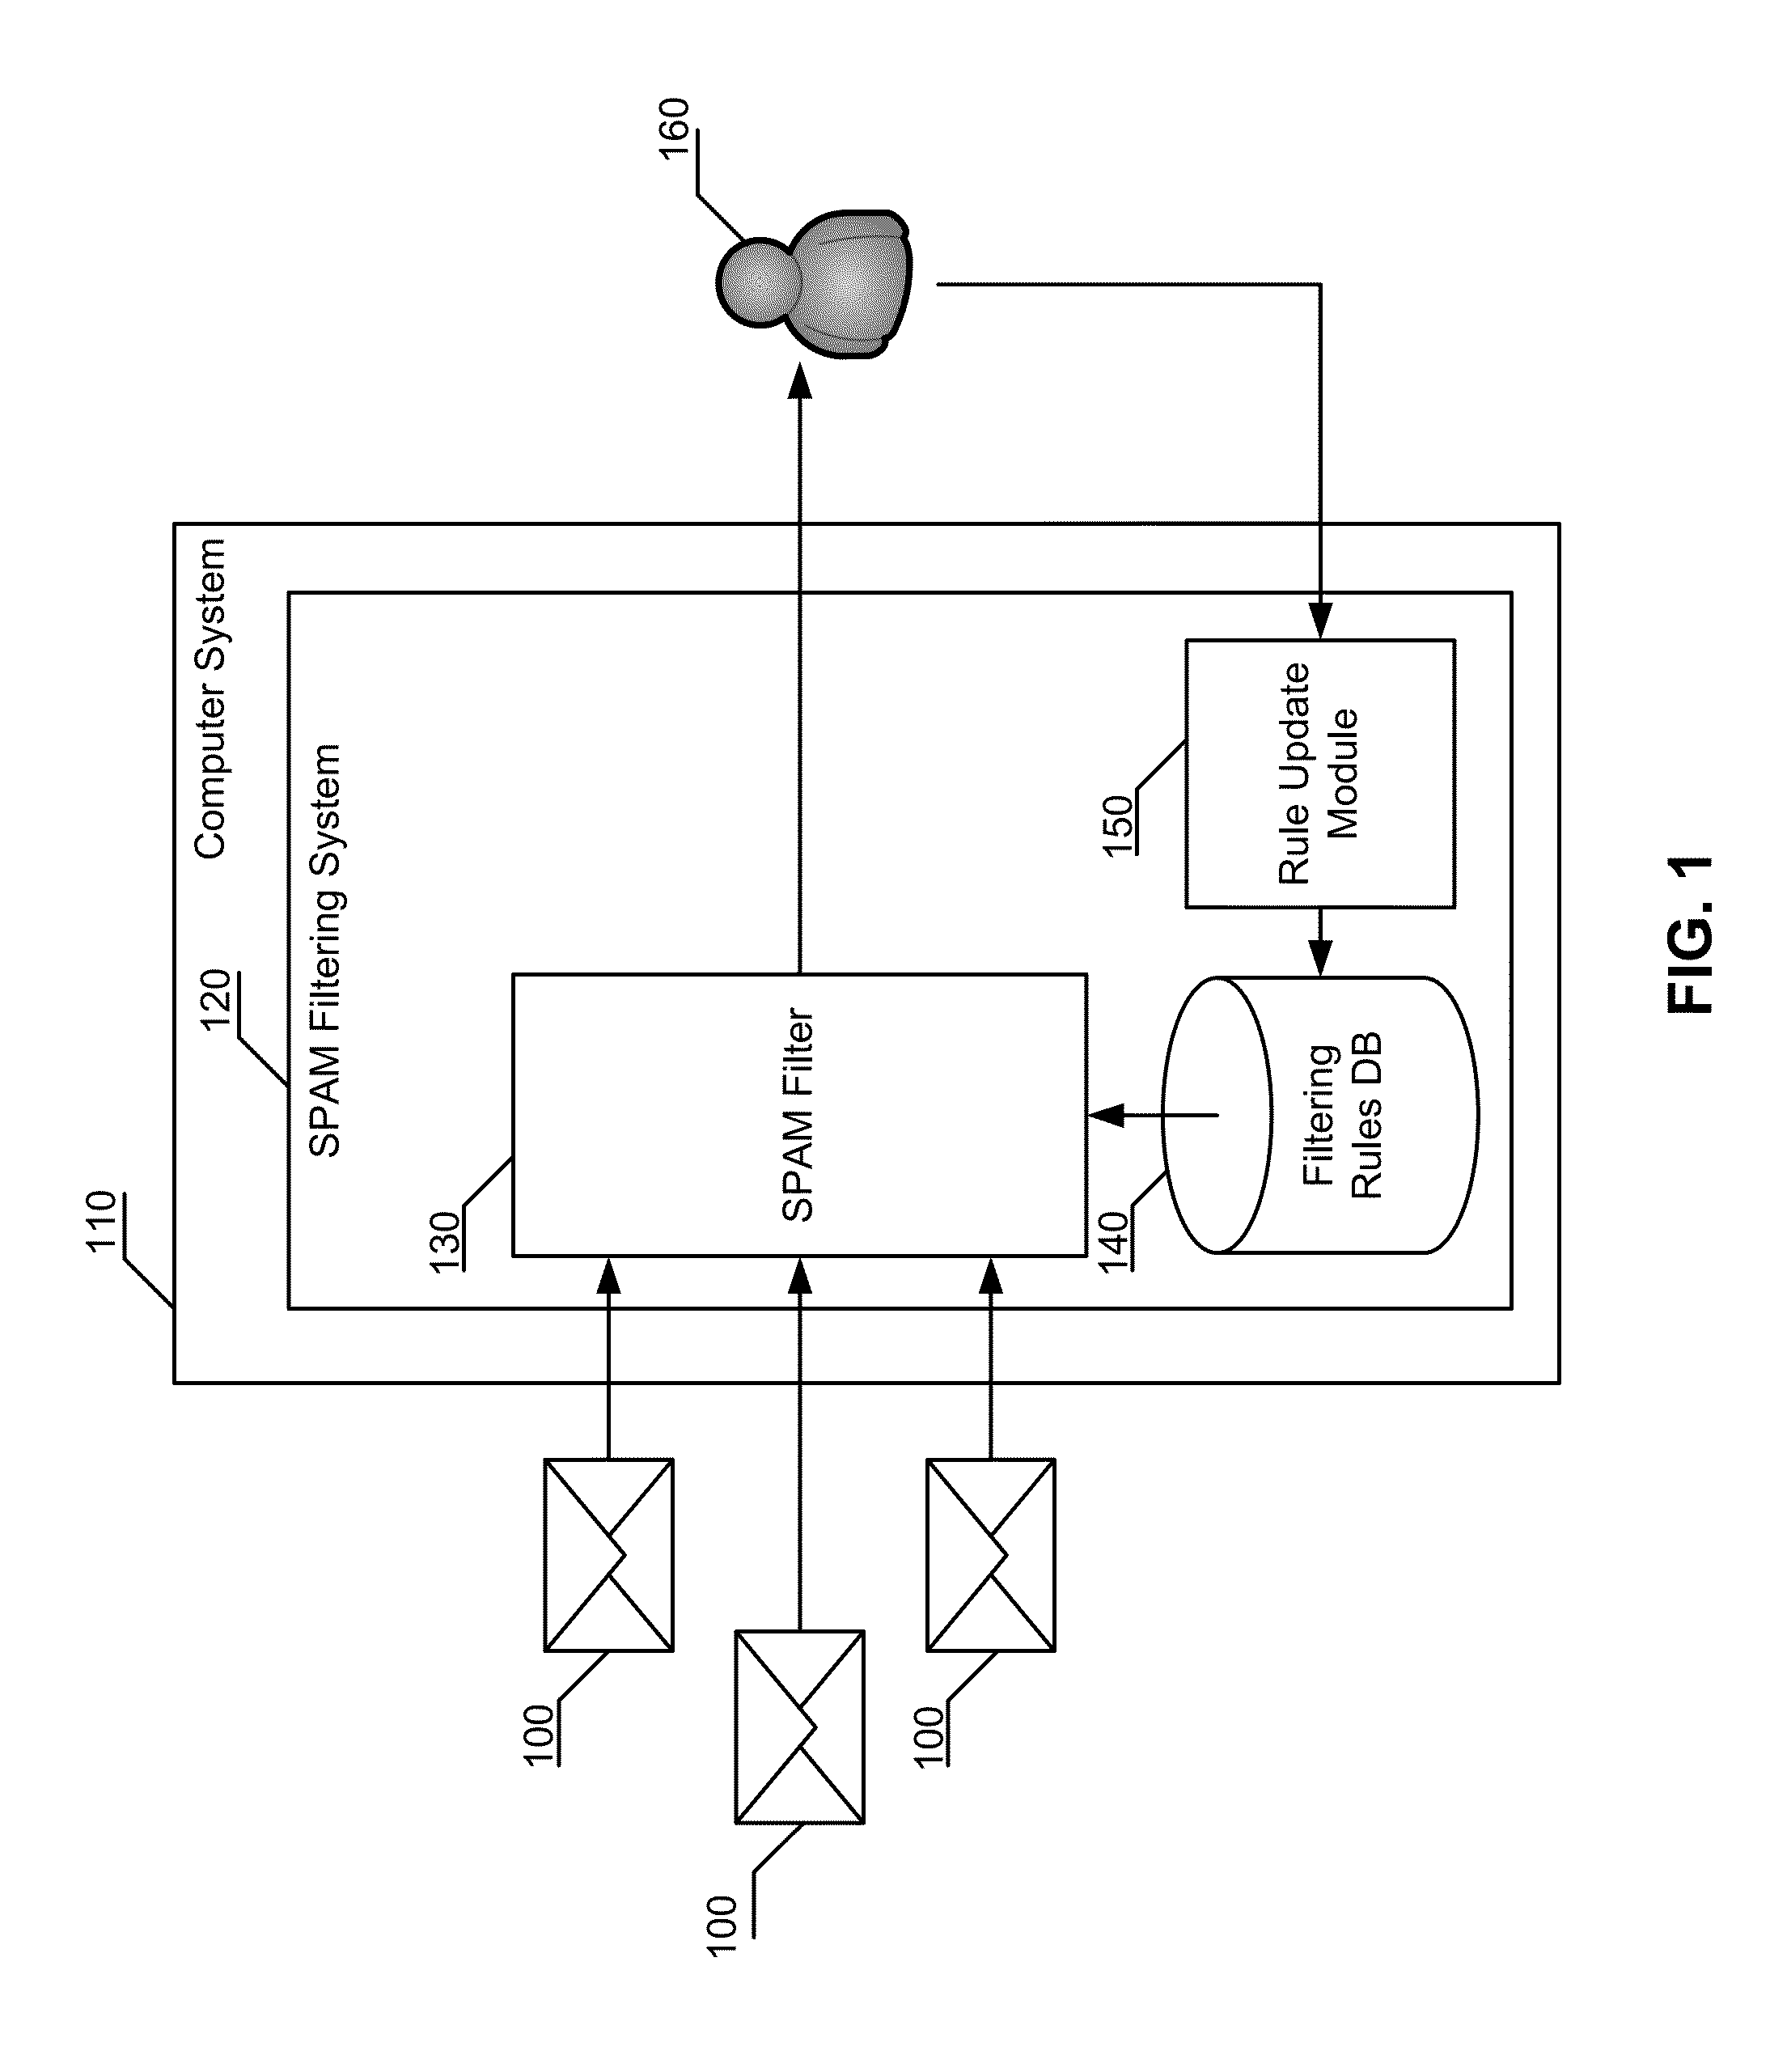 System and method for filtering spam messages based on user reputation